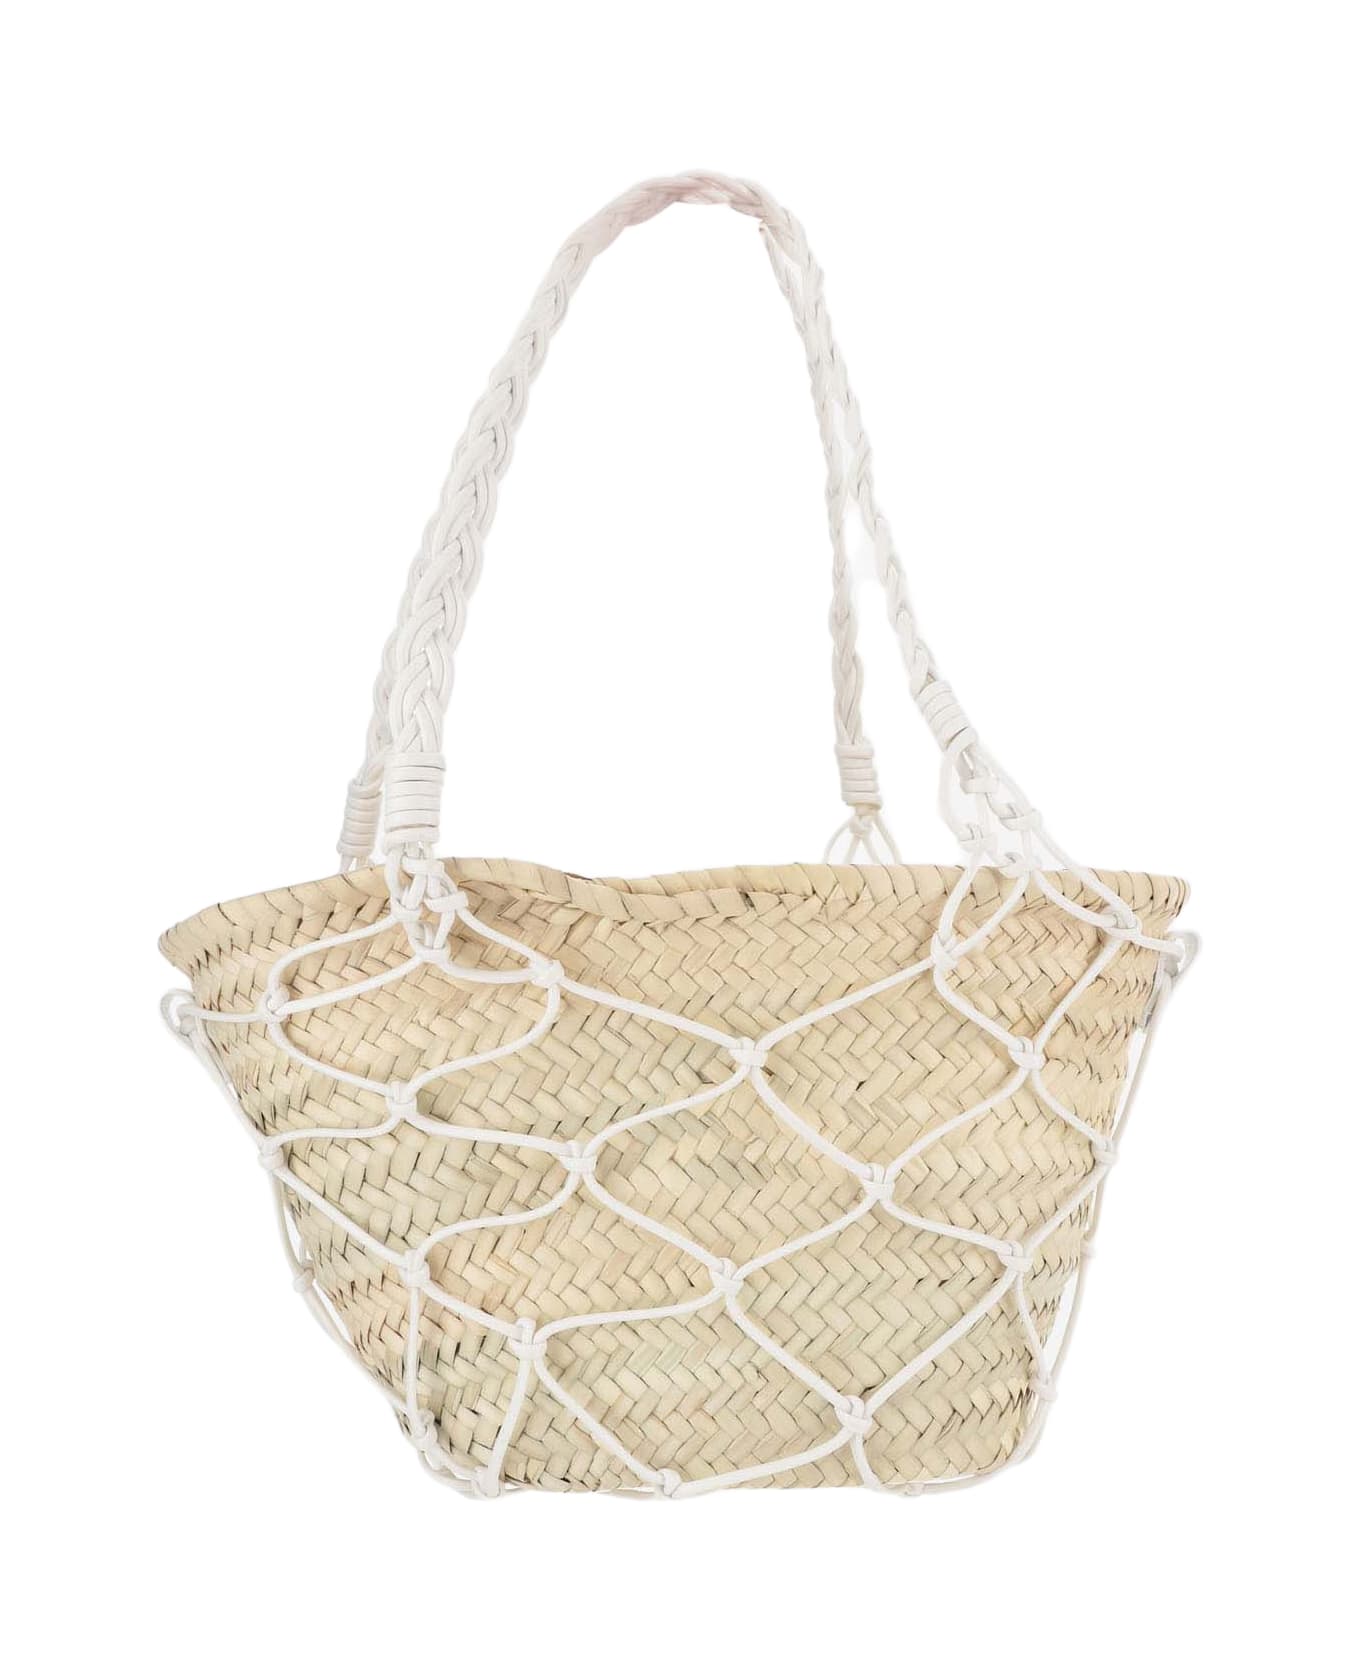 Filippo Catarzi Straw And Cotton Bag With Leather Details - Beige トートバッグ